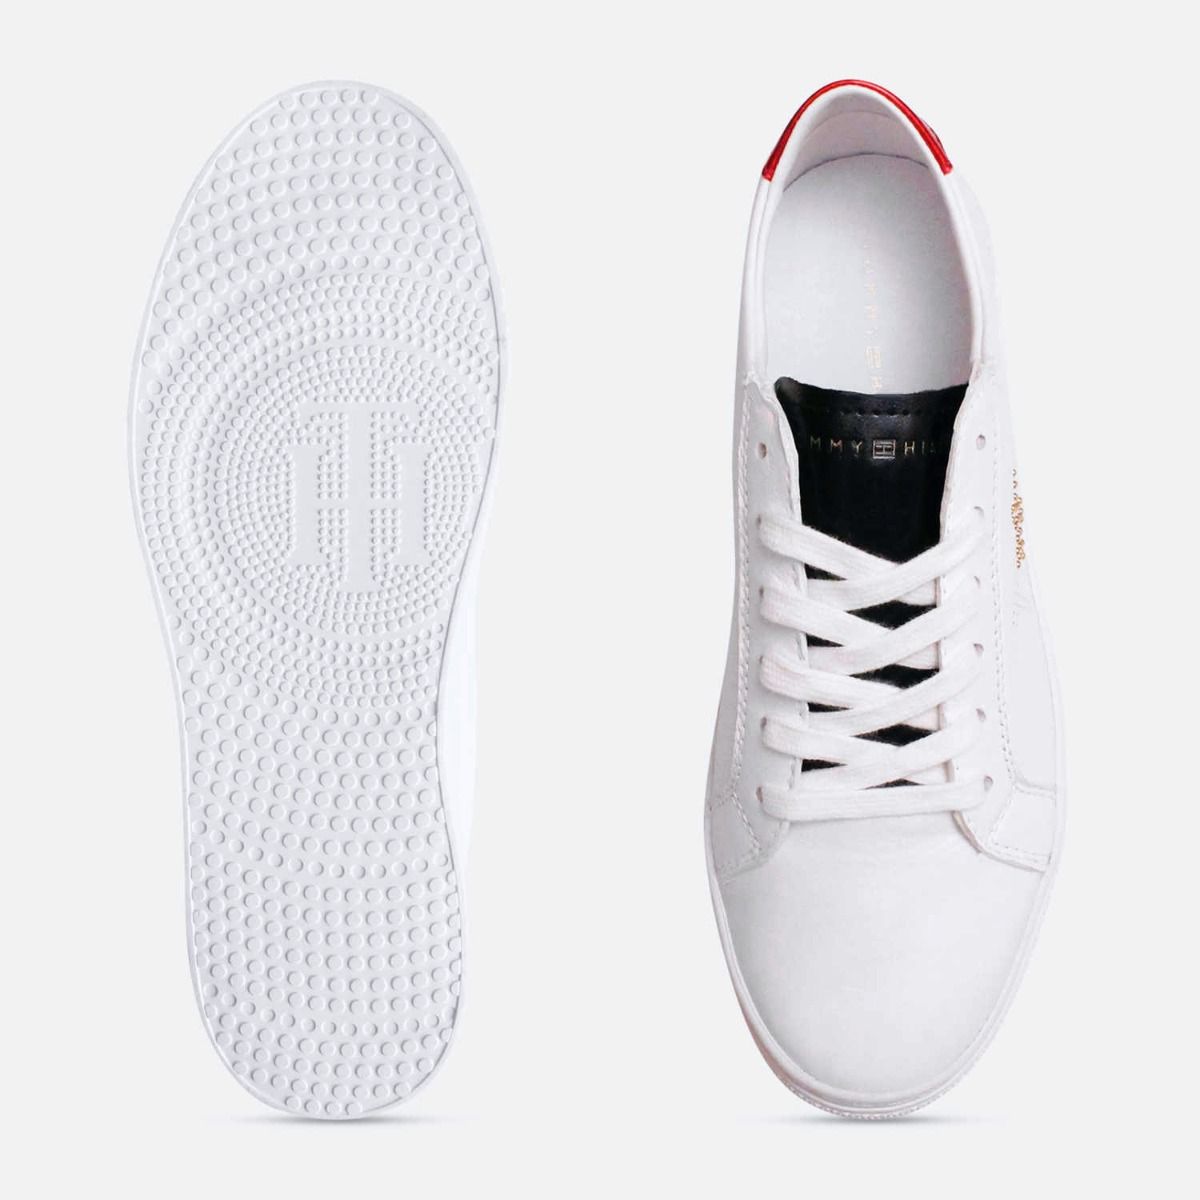 Tommy Hilfiger Gold Star Studded Training Shoes in White